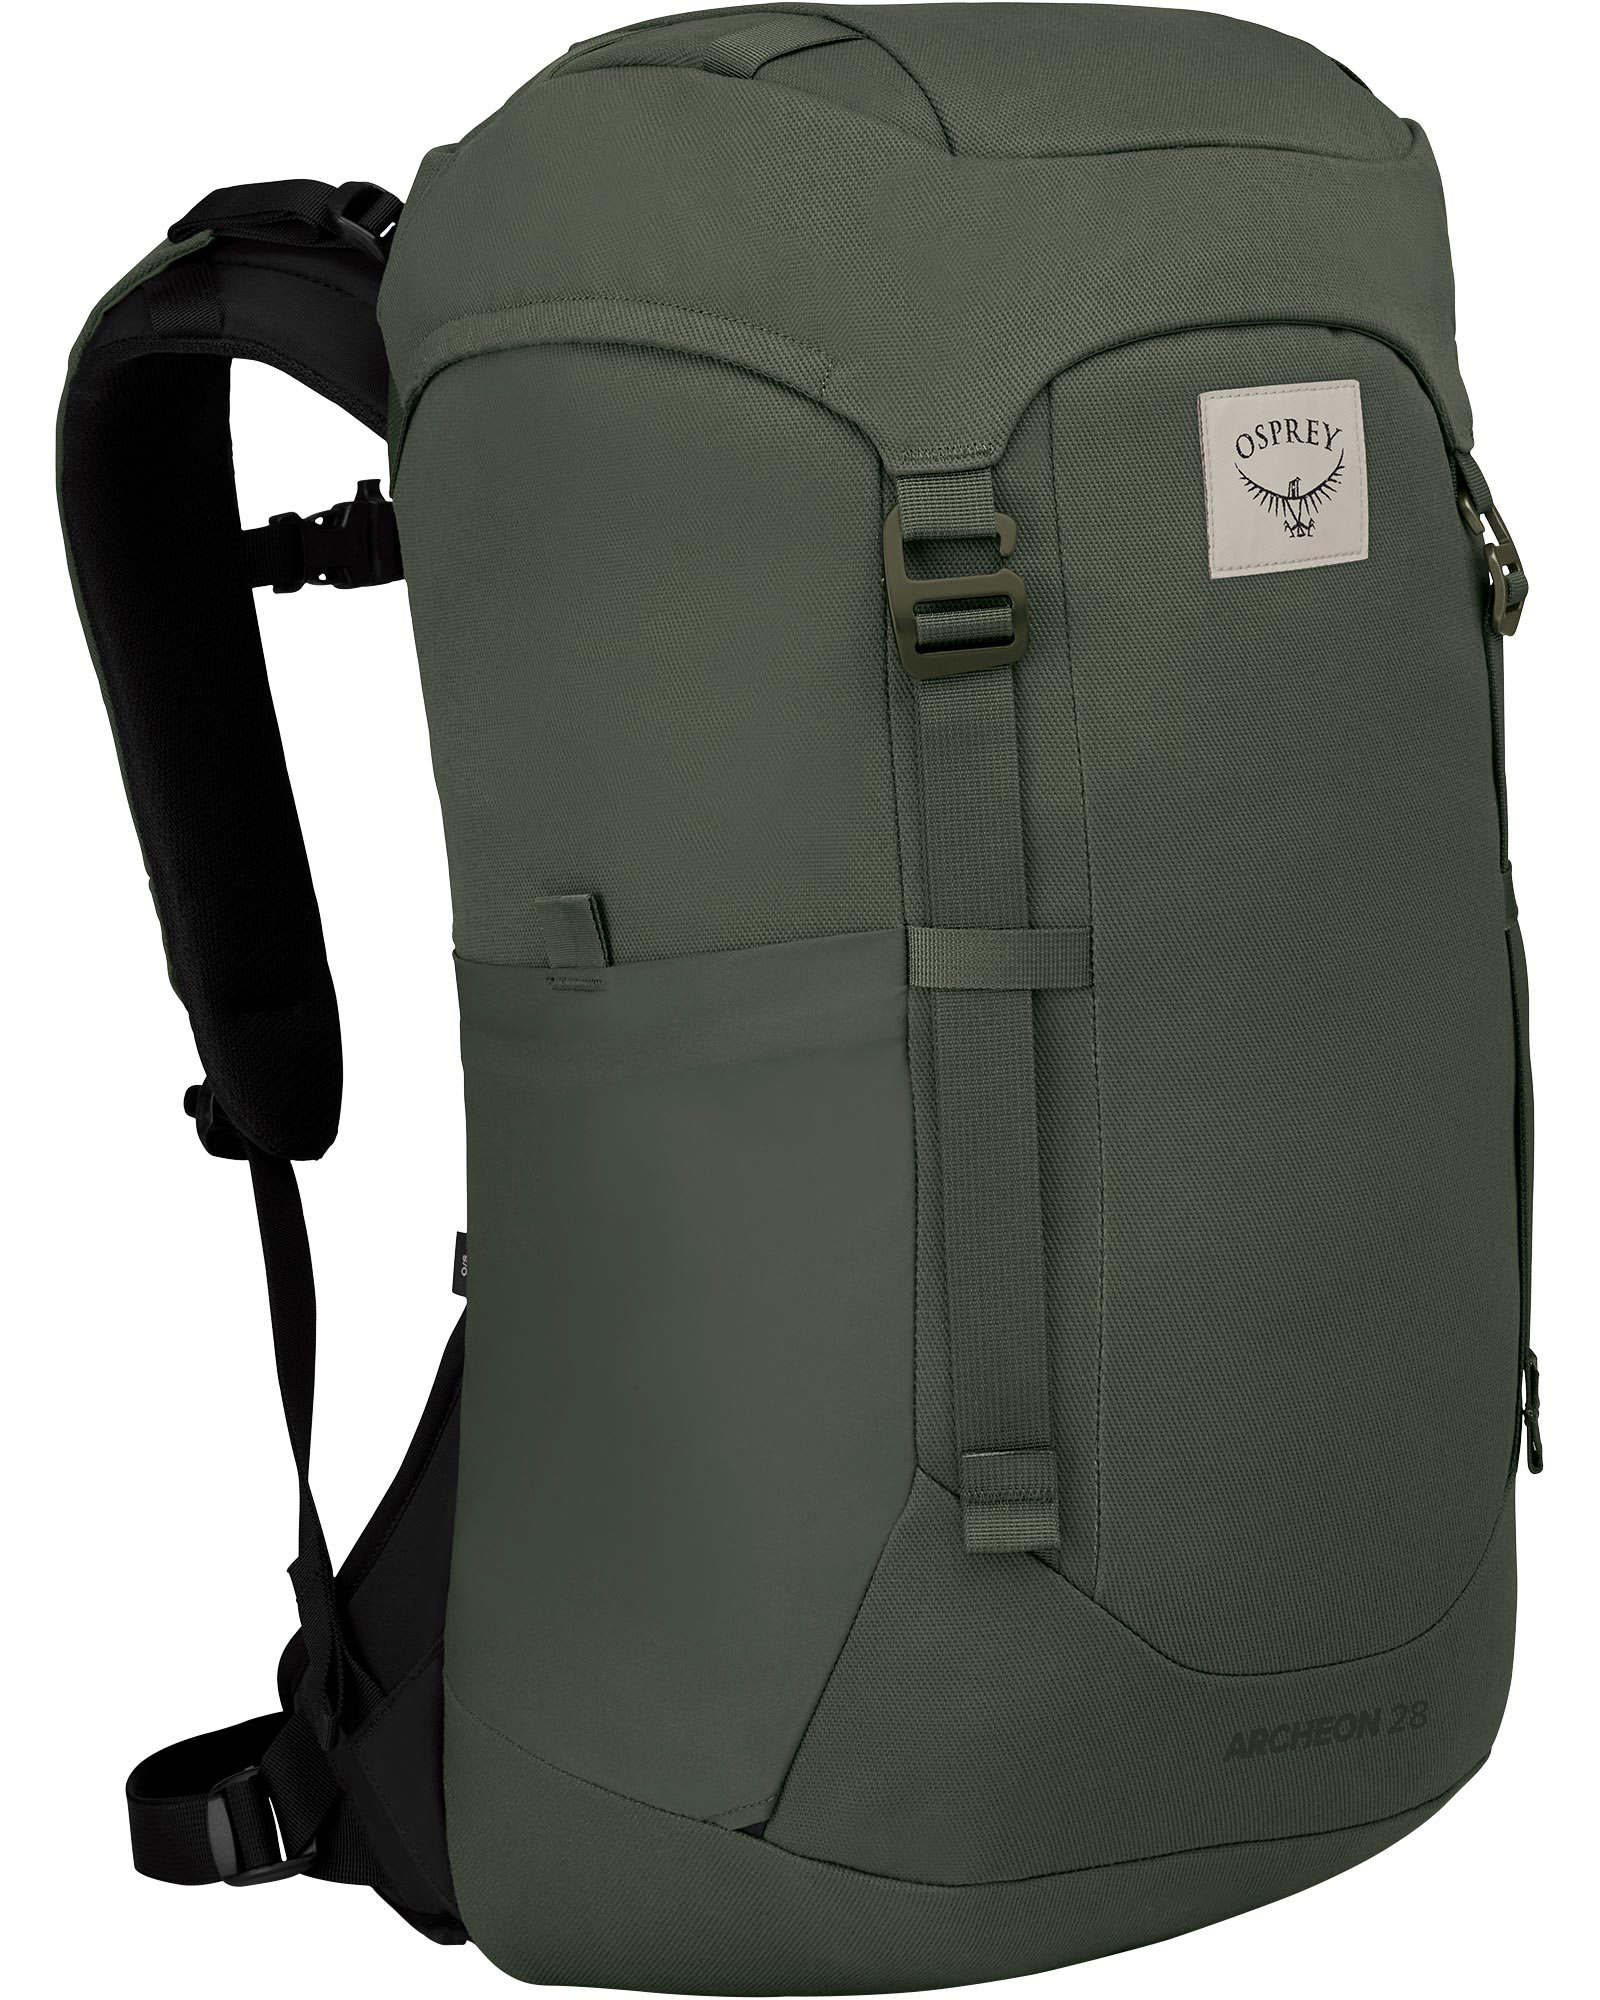 Product image of Osprey Archeon 28 Backpack